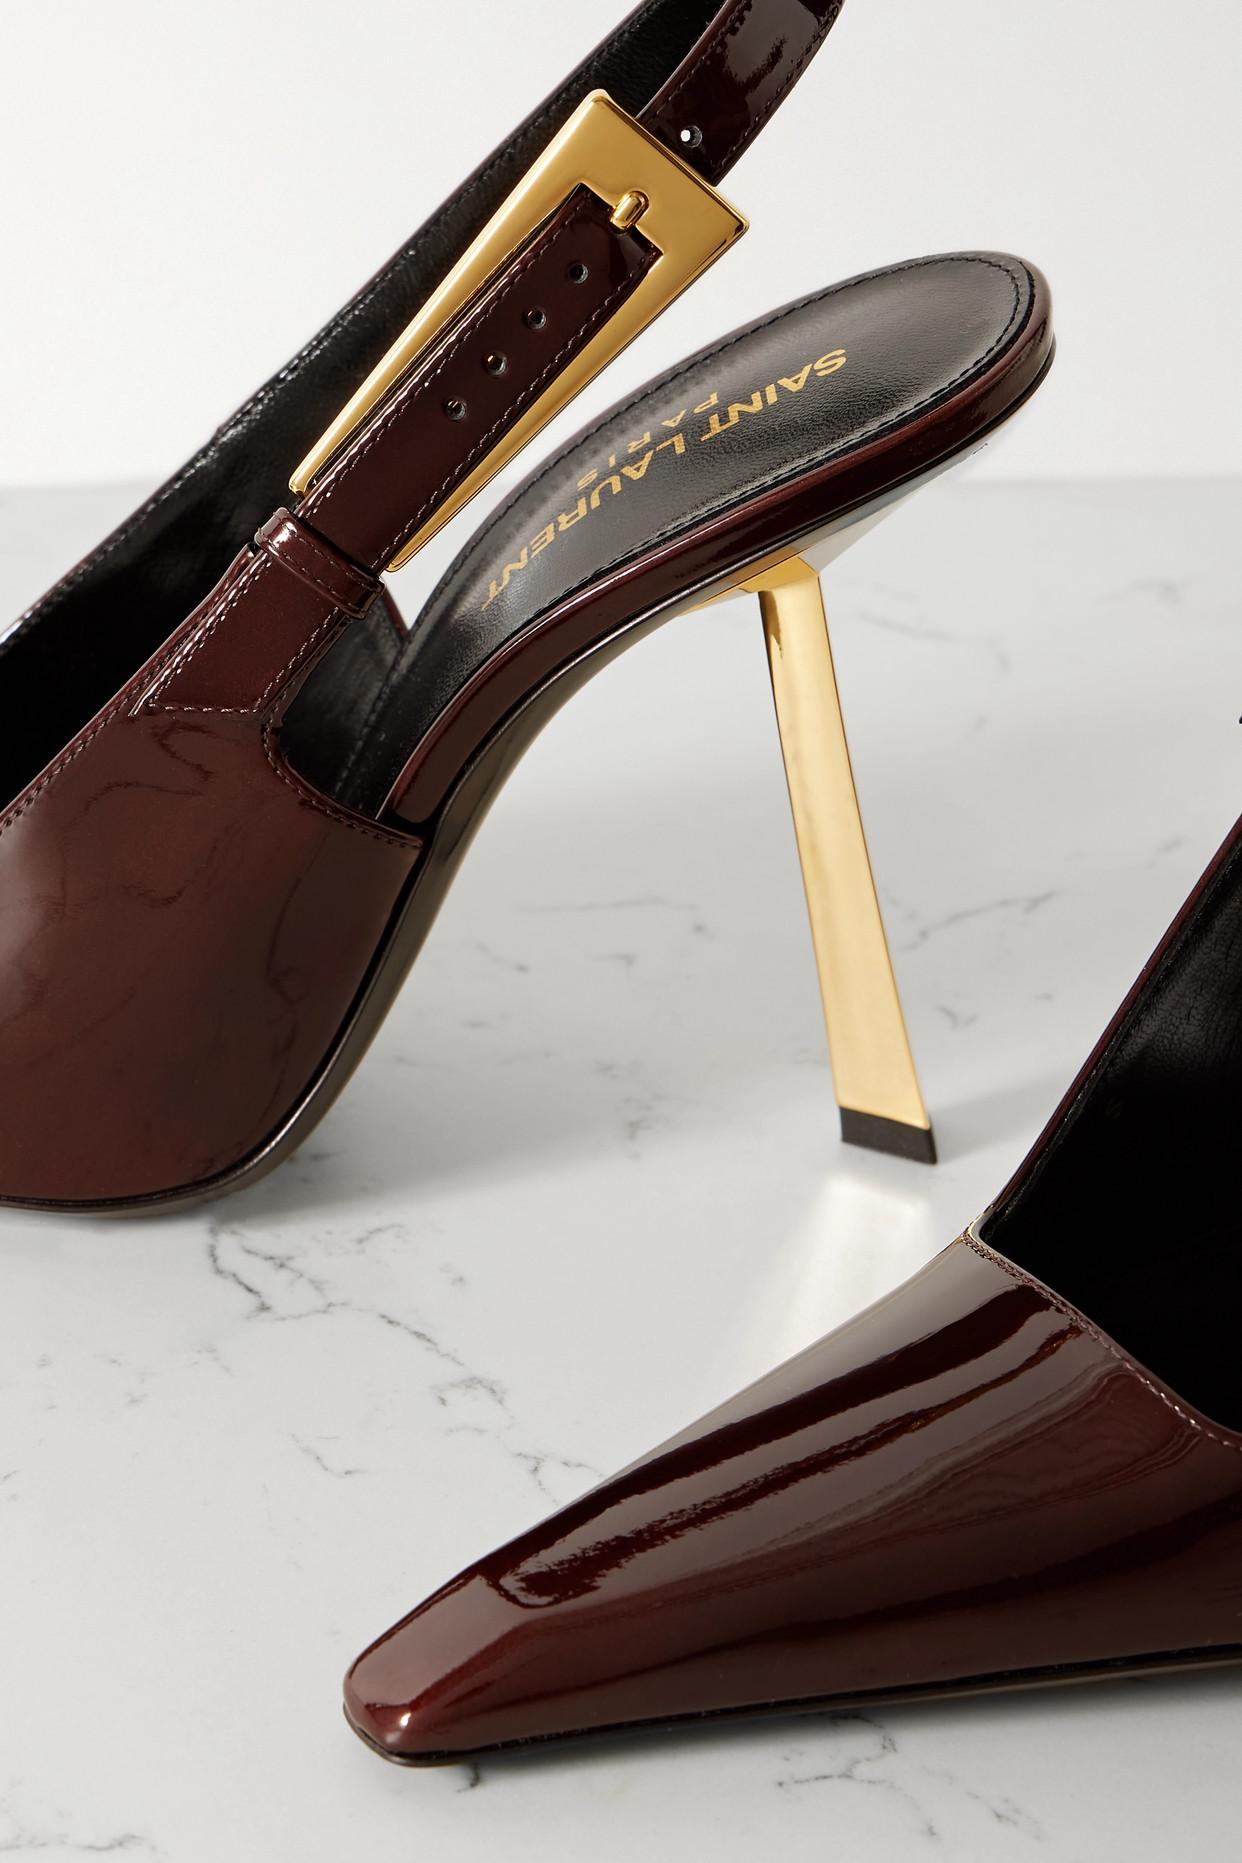 Saint Laurent Lee 110 Buckled Patent-leather Pumps in Brown